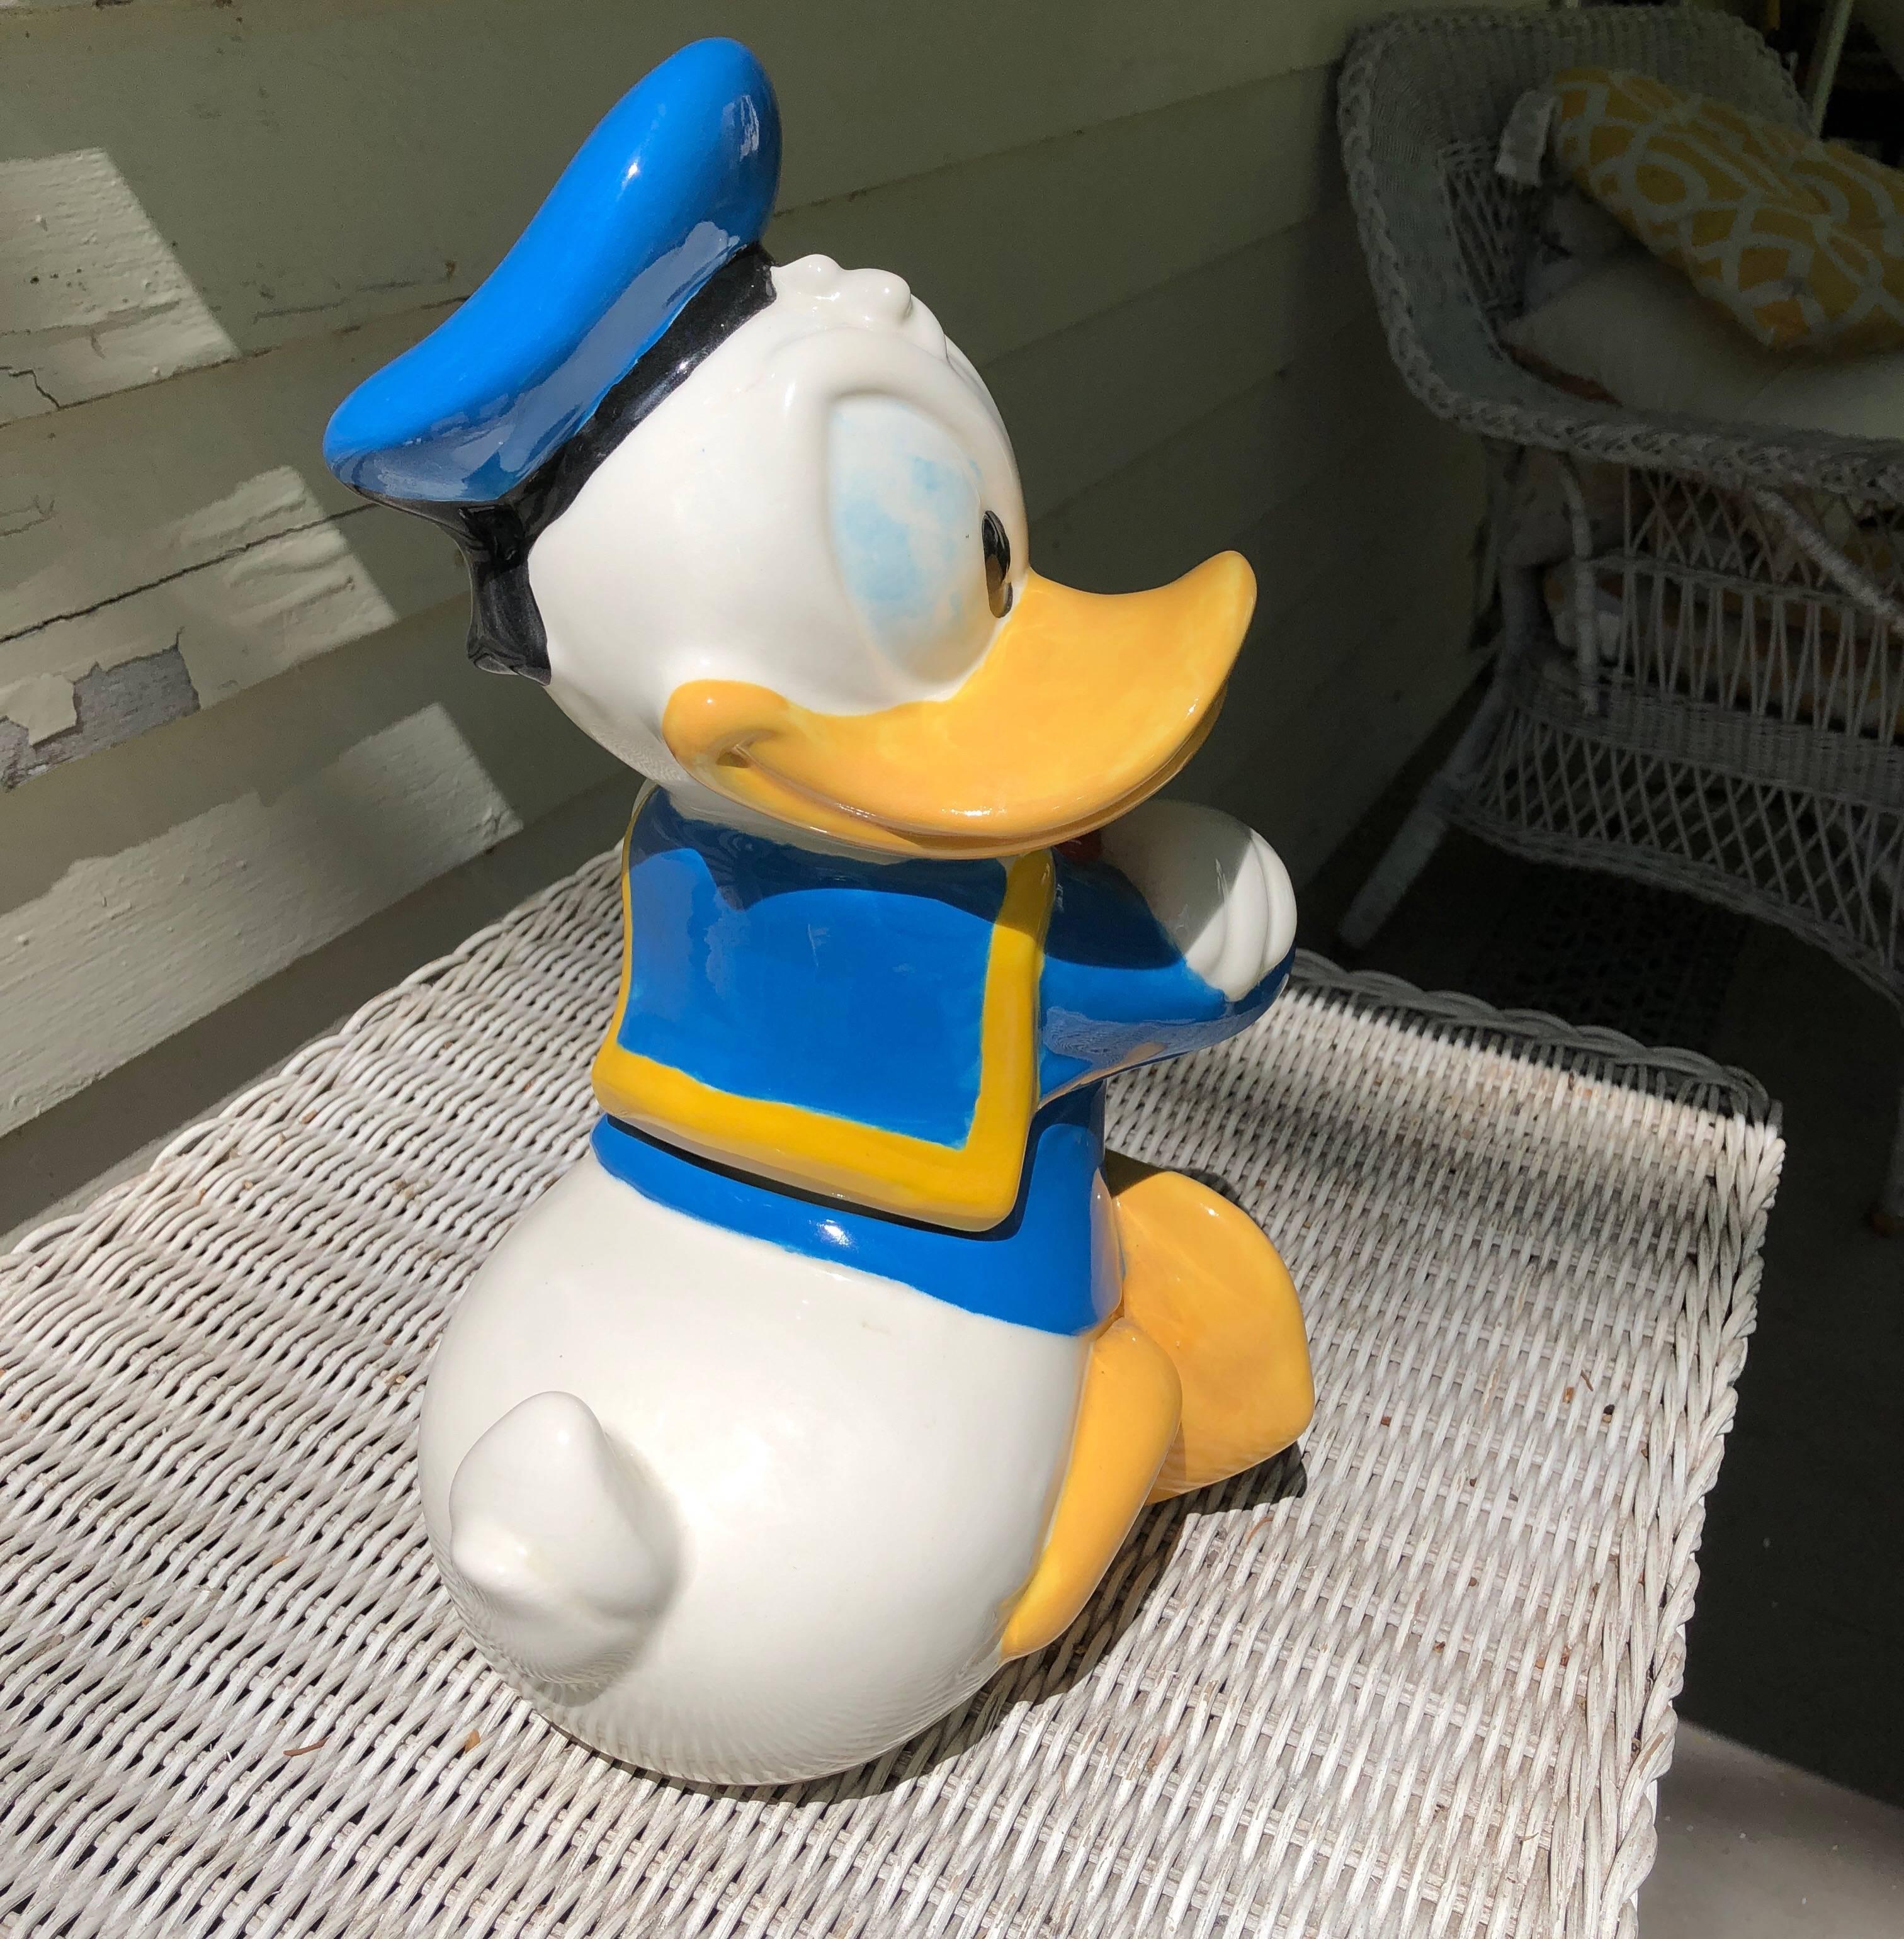 Just the thing for those Christmas cookies. Vintage pottery Donald Duck cookie jar. Donald's head and chest can be lifted to store your
cookies. Manufactured by Treasure Craft for Disney in Mexico.